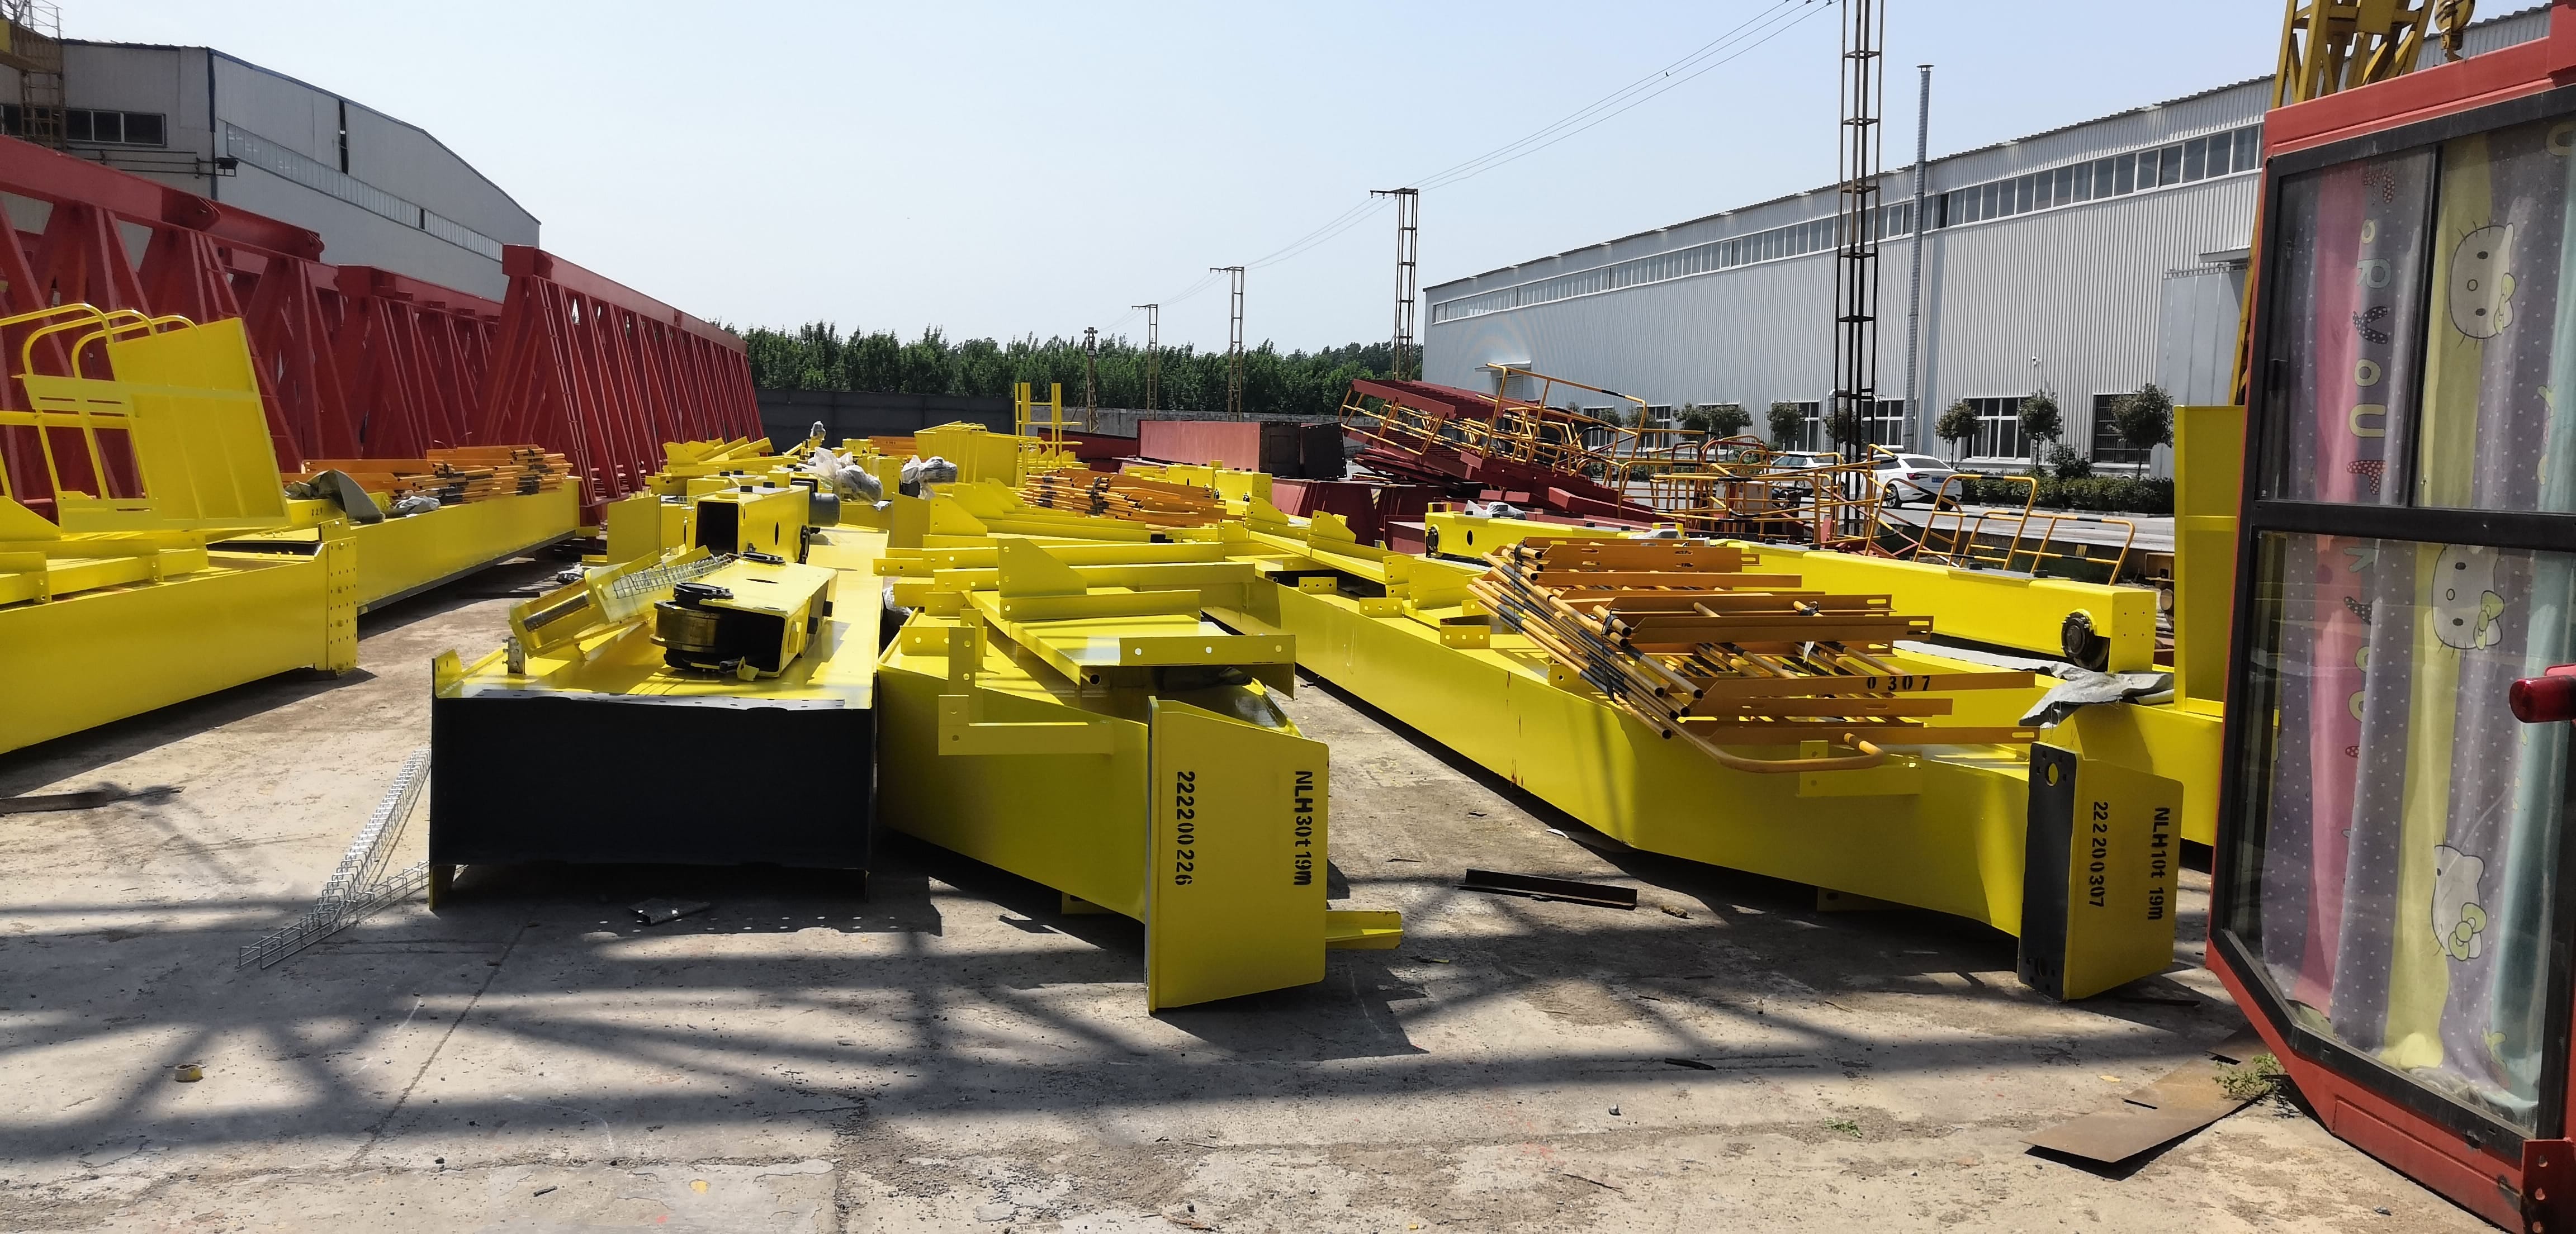 11 Sets Of NLH Overhead Crane Exported to Qatar2